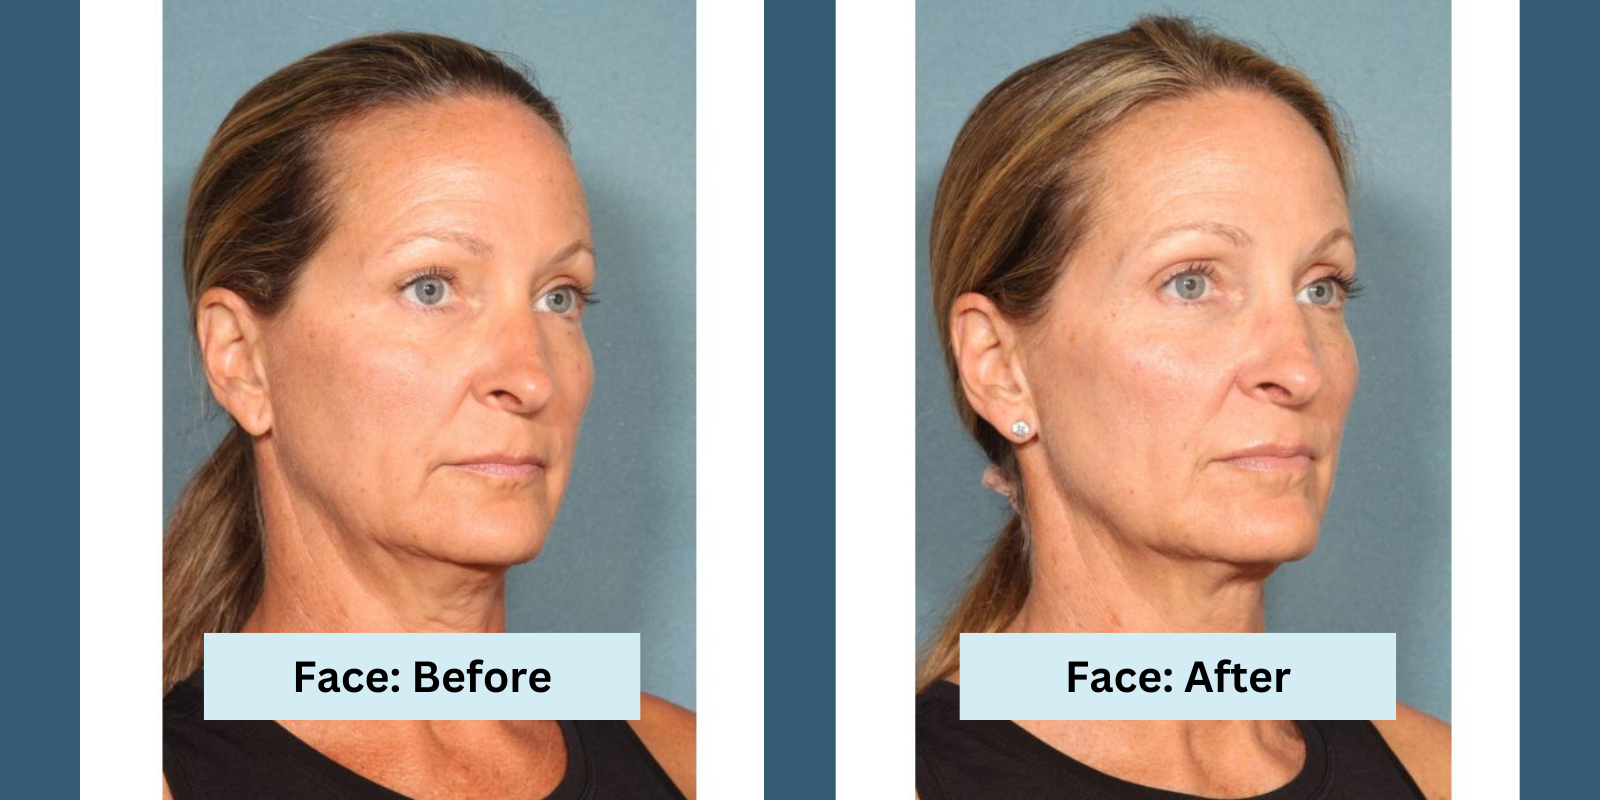 Sofwave treatment for face: Before and After pictures